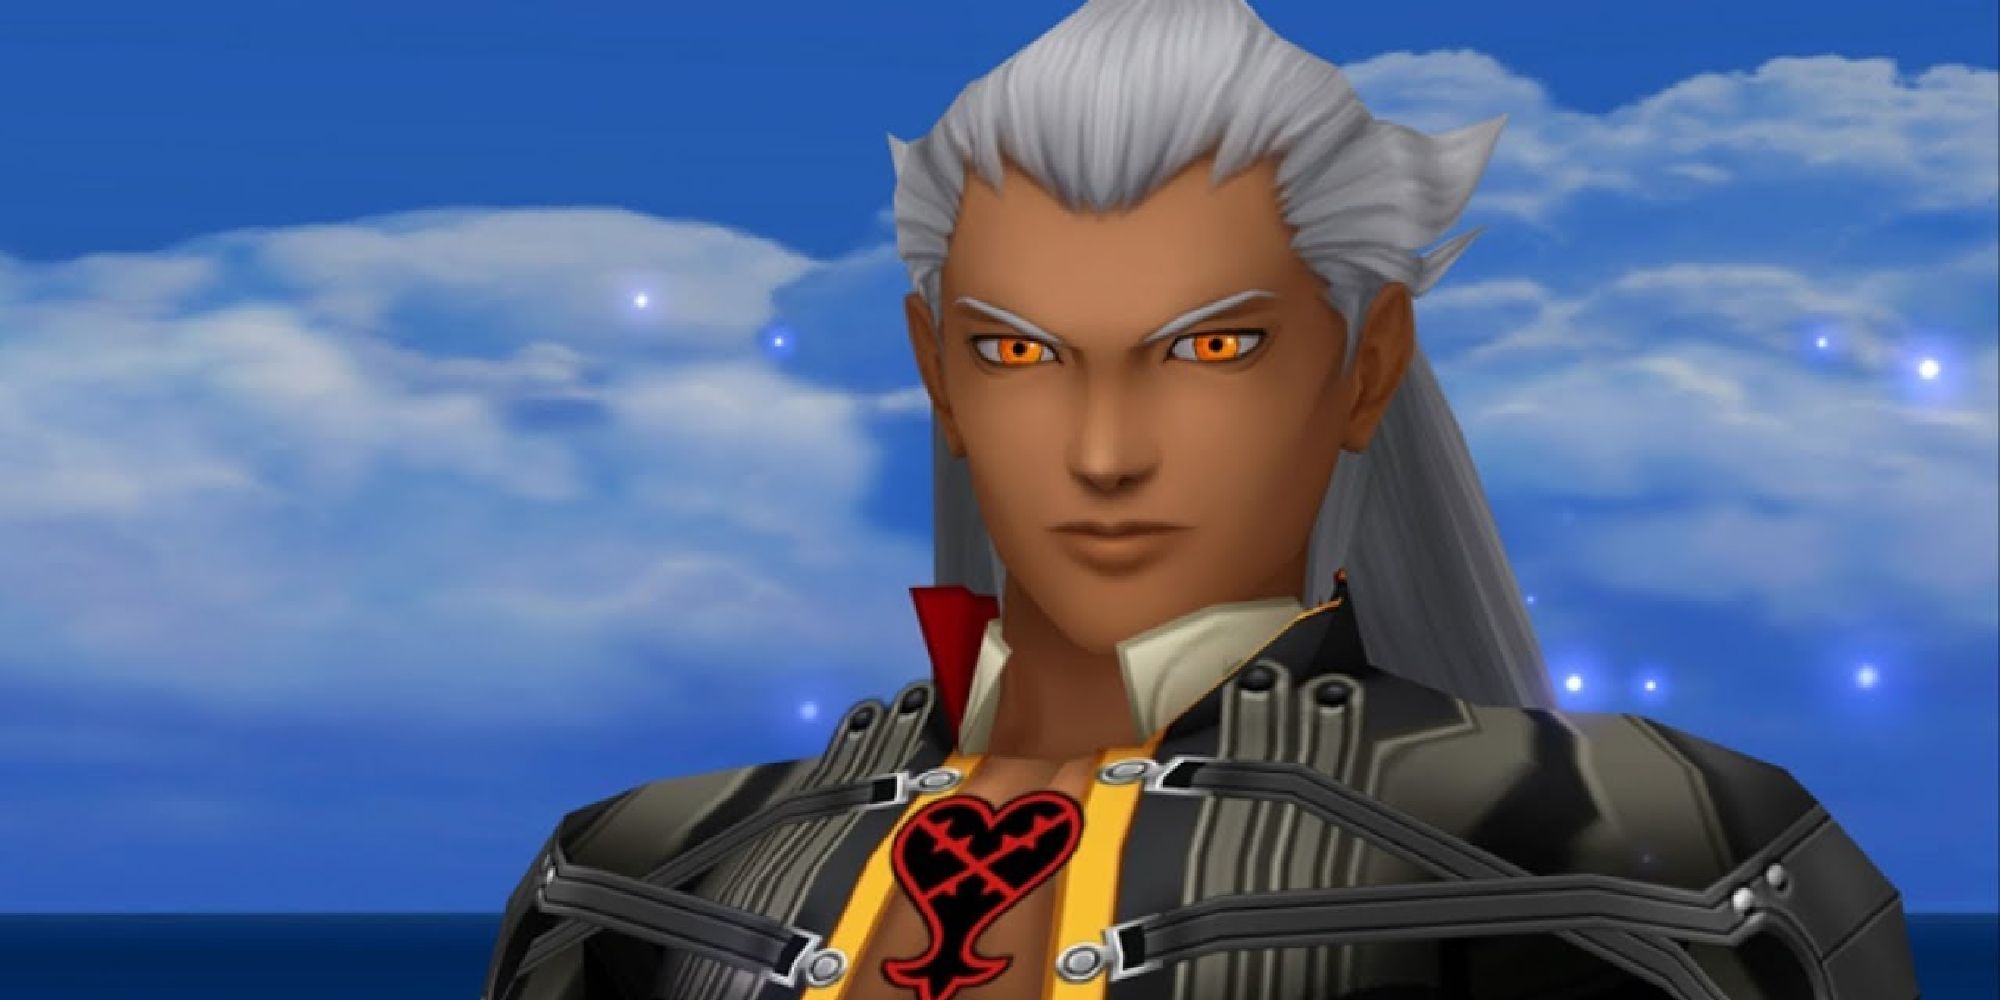 Ansem stares down Sora before the final boss fight on Destiny Island in Kingdom Hearts